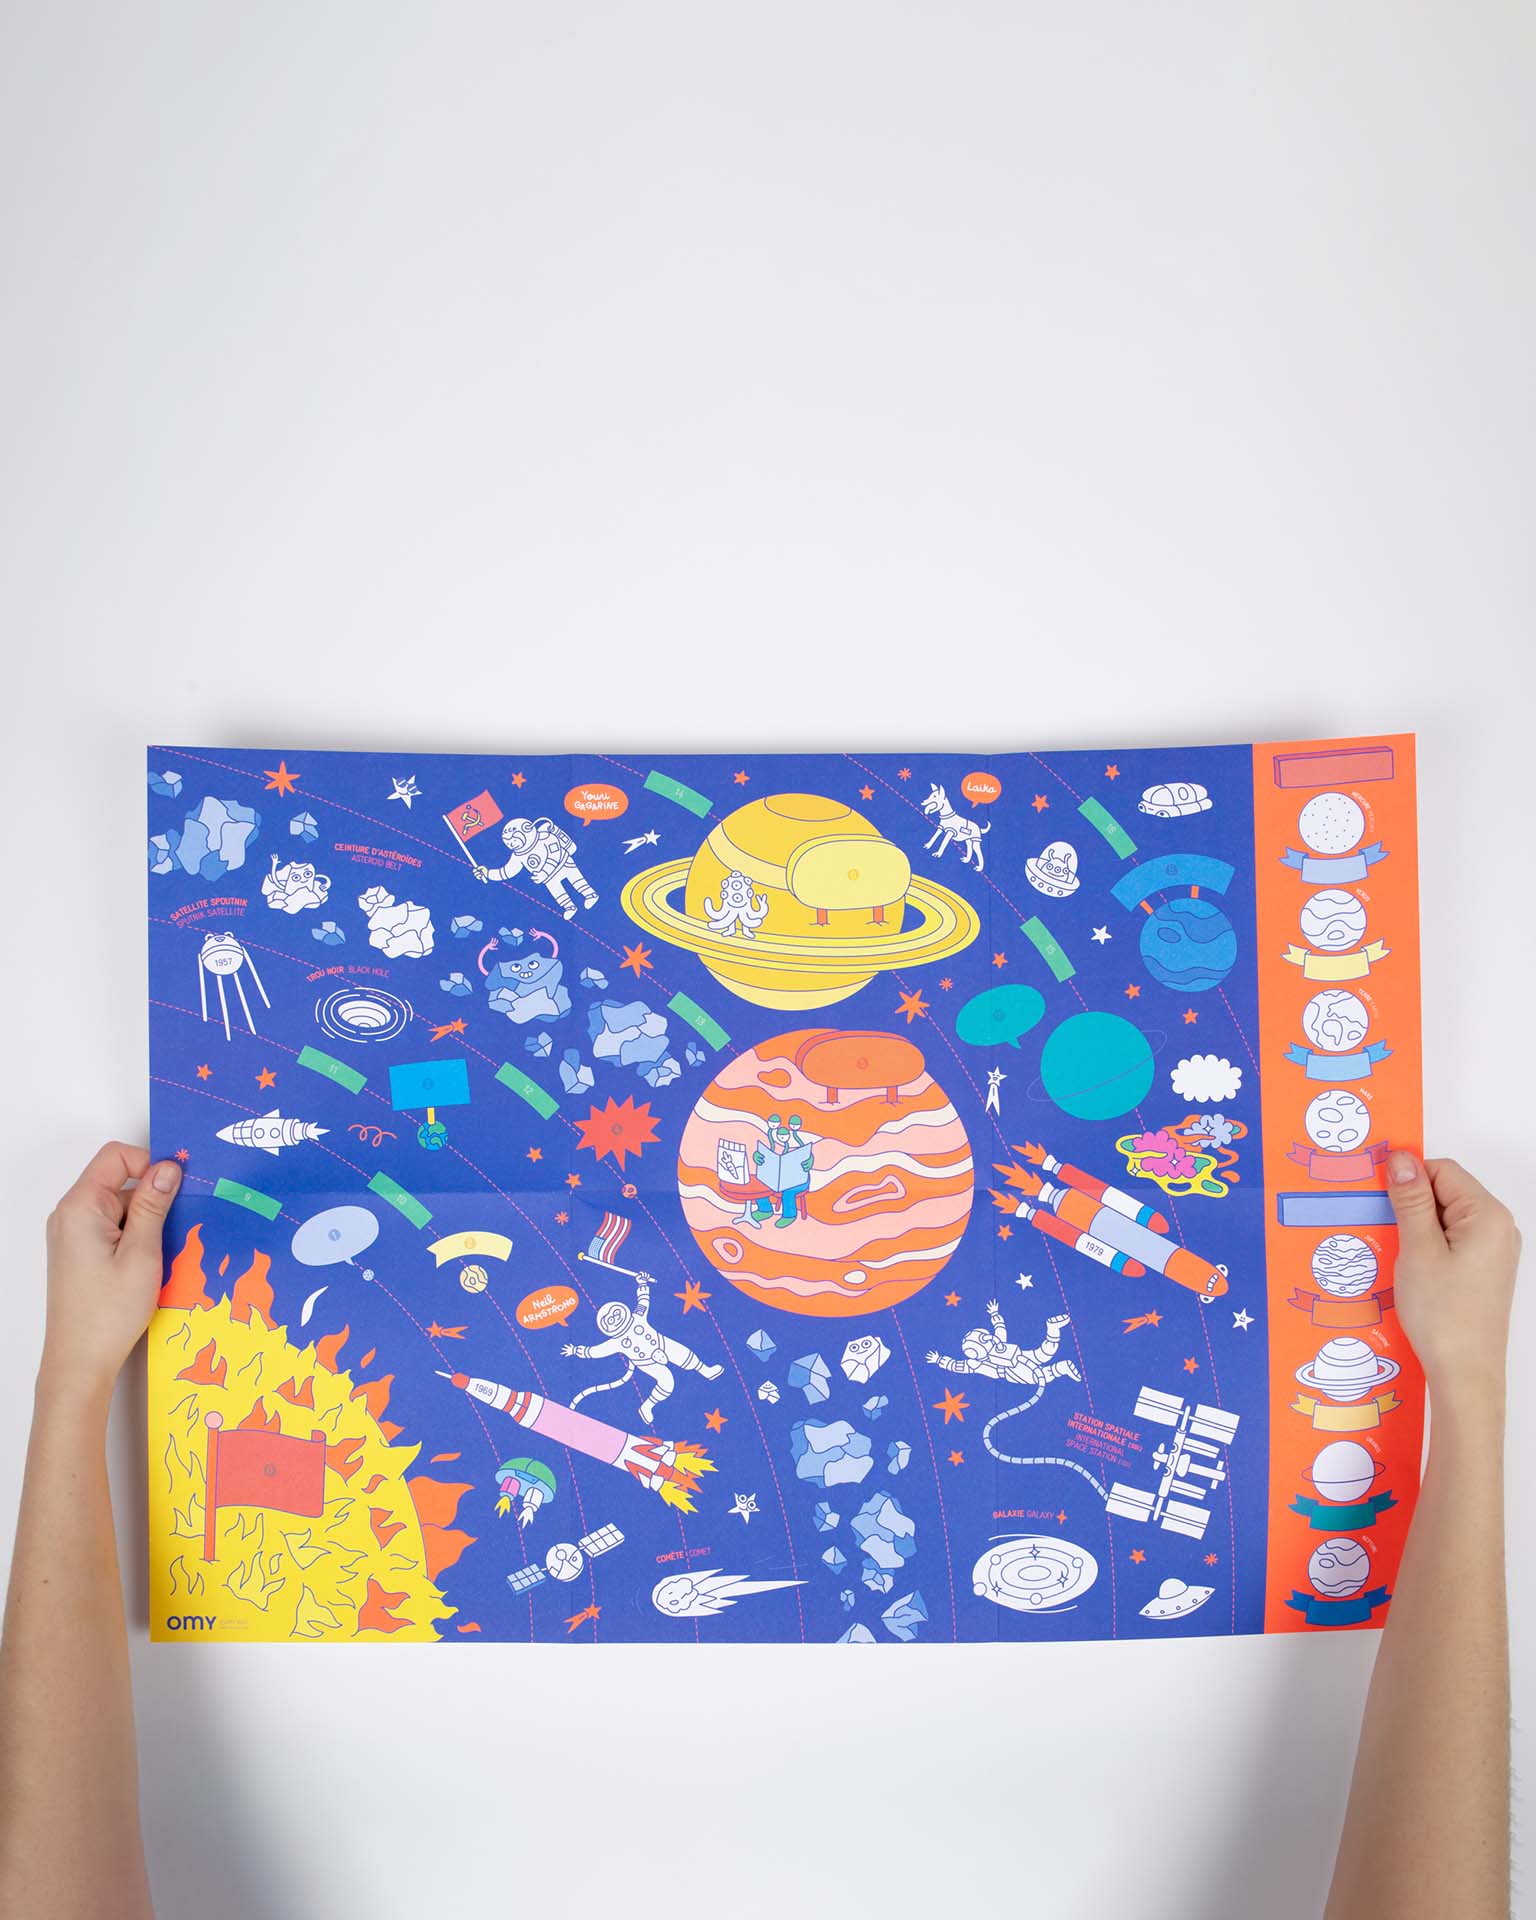 Little omy play solar system poster